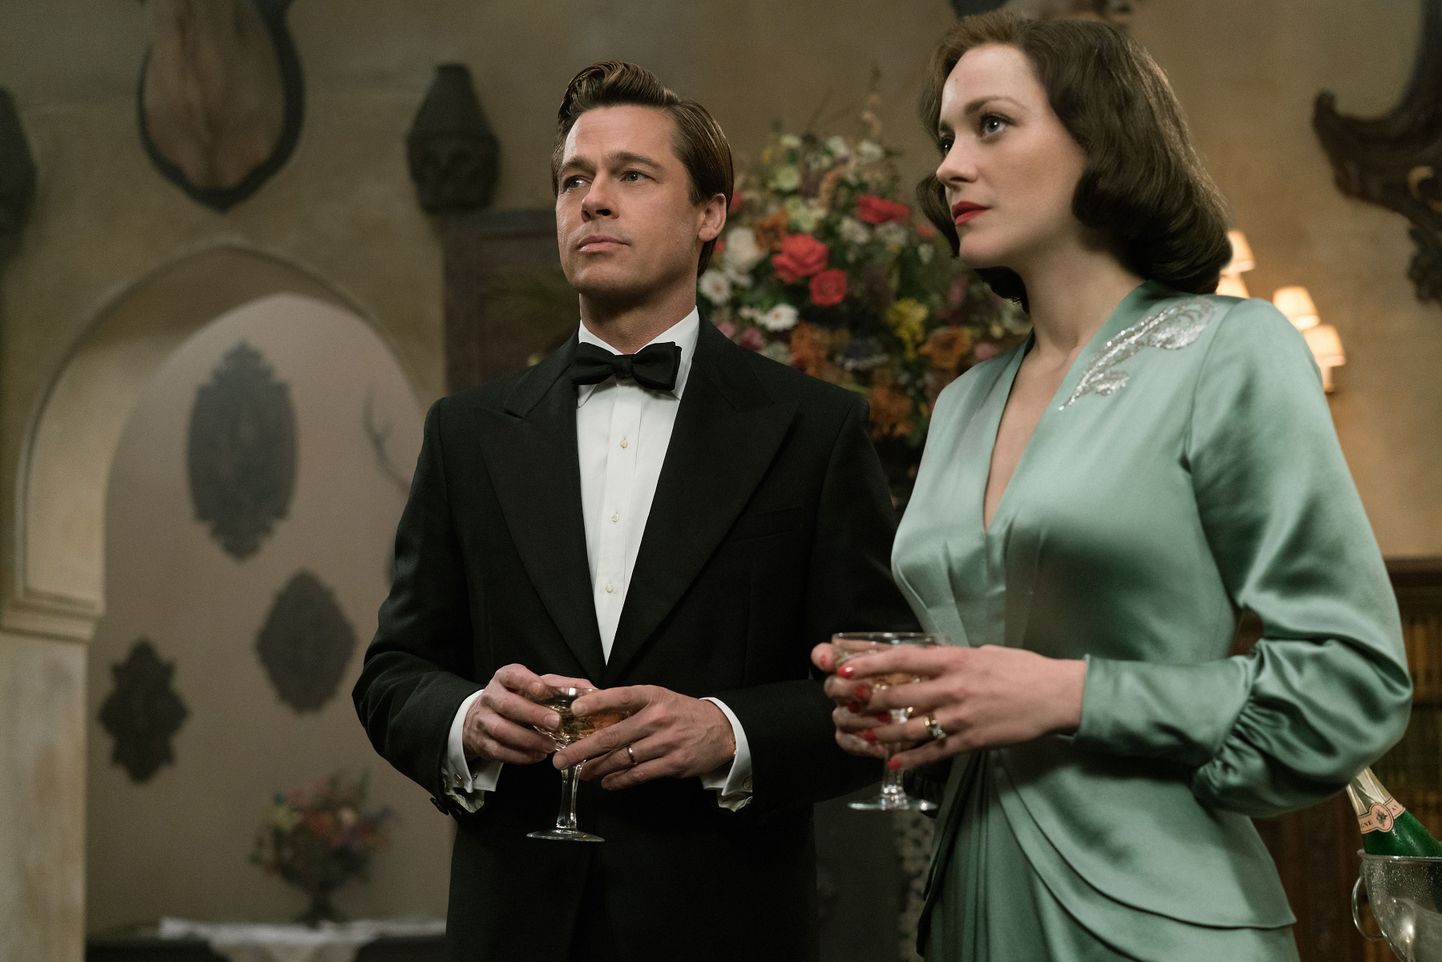 This image released by Paramount Pictures shows Marion Cotillard, right, and Brad Pitt in a scene from, "Allied," in theaters on November 23. (Daniel Smith/Paramount Pictures via AP)